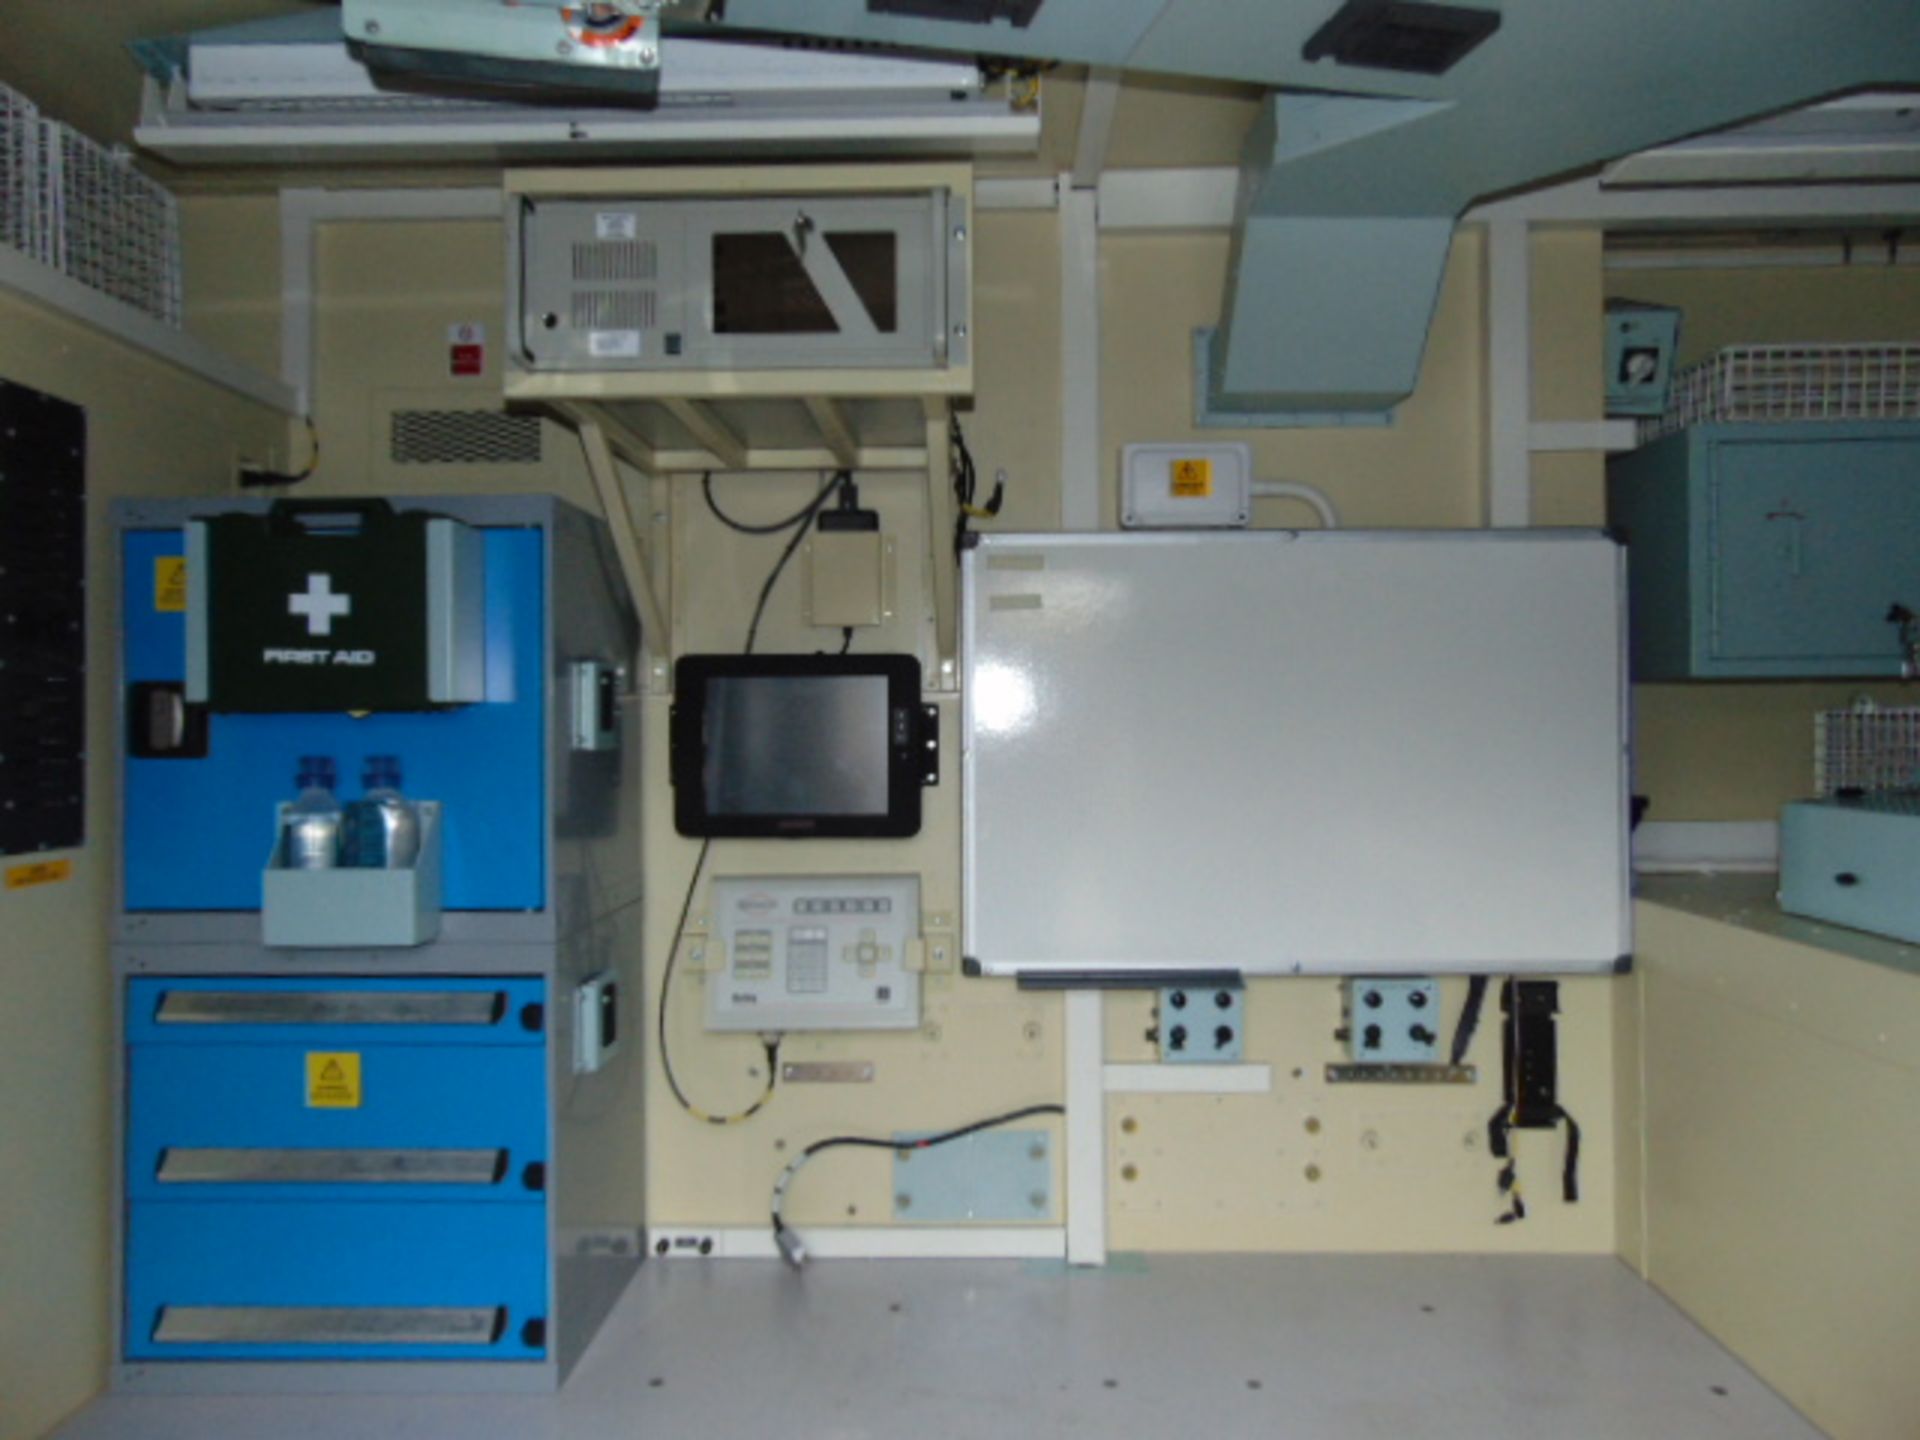 Containerised Insys Ltd Integrated Biological Detection/Decontamination System (IBDS) - Image 22 of 66